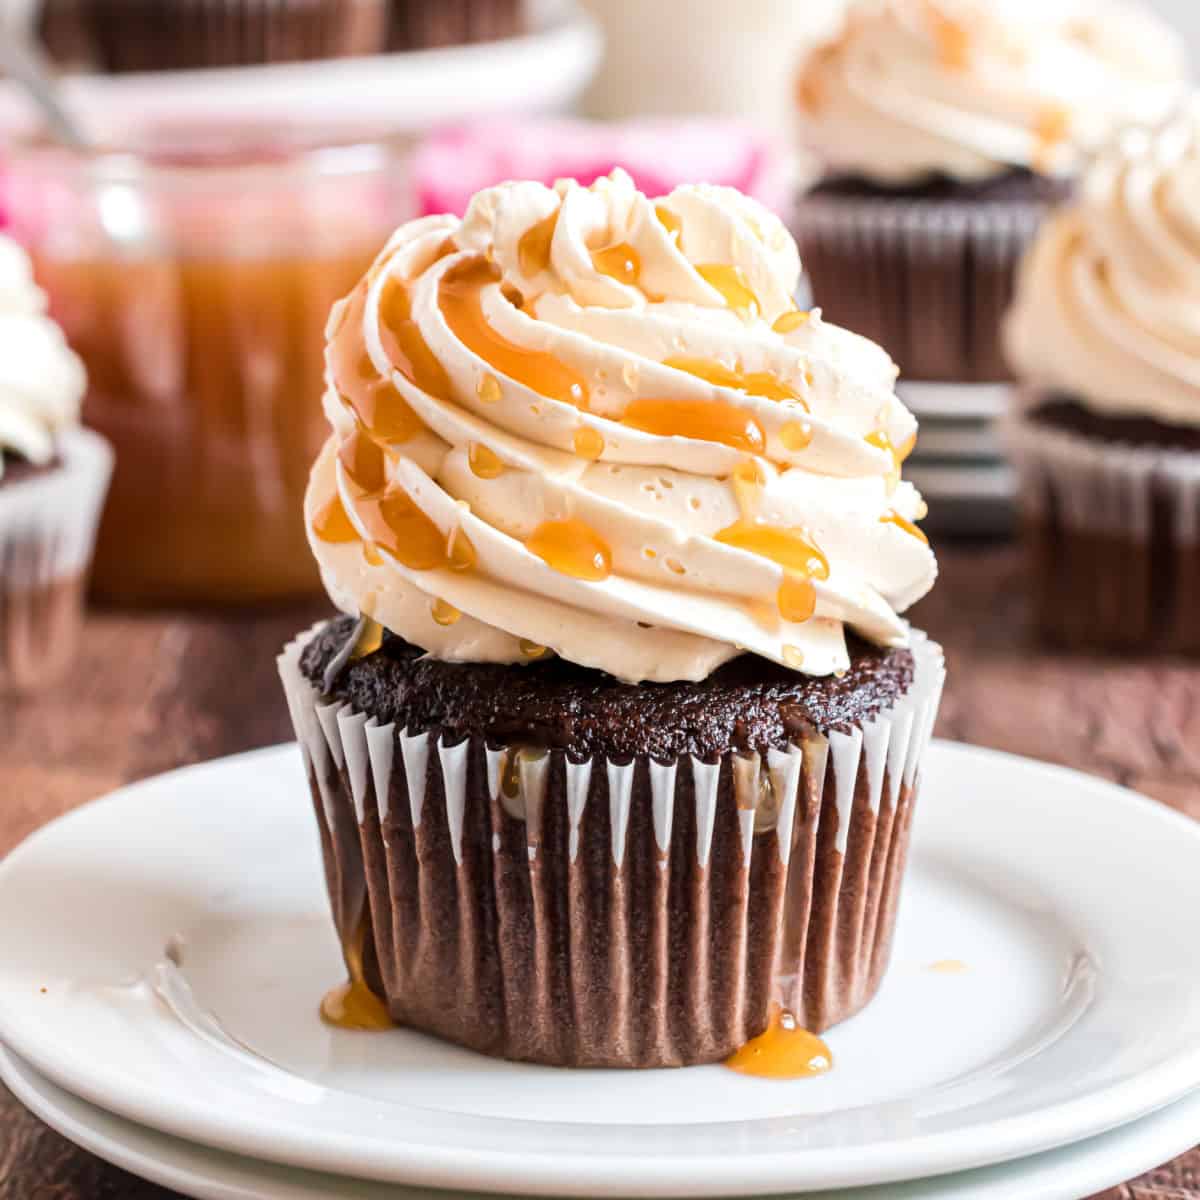 Get the recipe for salted caramel swiss meringue frosting at ShugarySweets.com